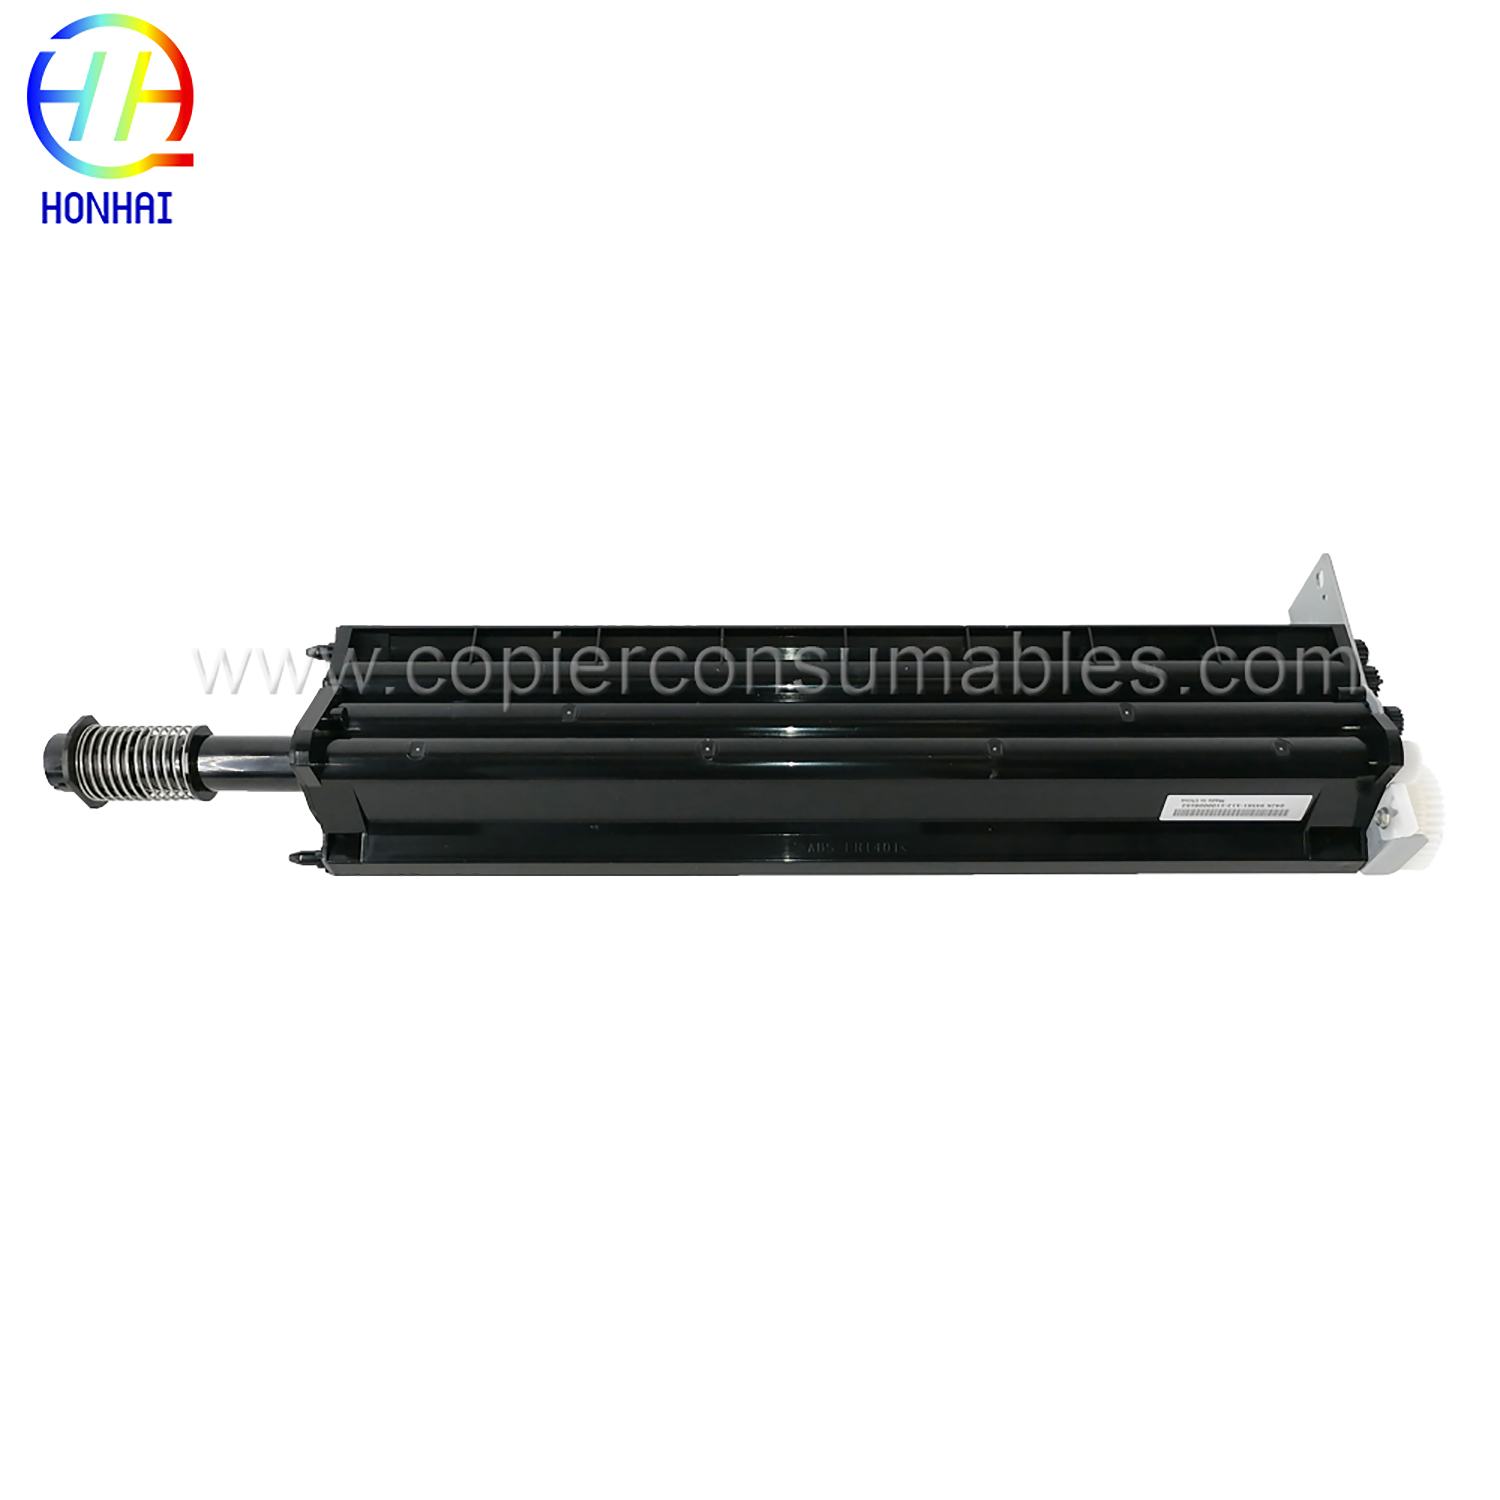 IBT Cleaner Assembly for Xerox 042K94561 DC240, DC242, DC250, DC252, DC260 (3) 拷贝